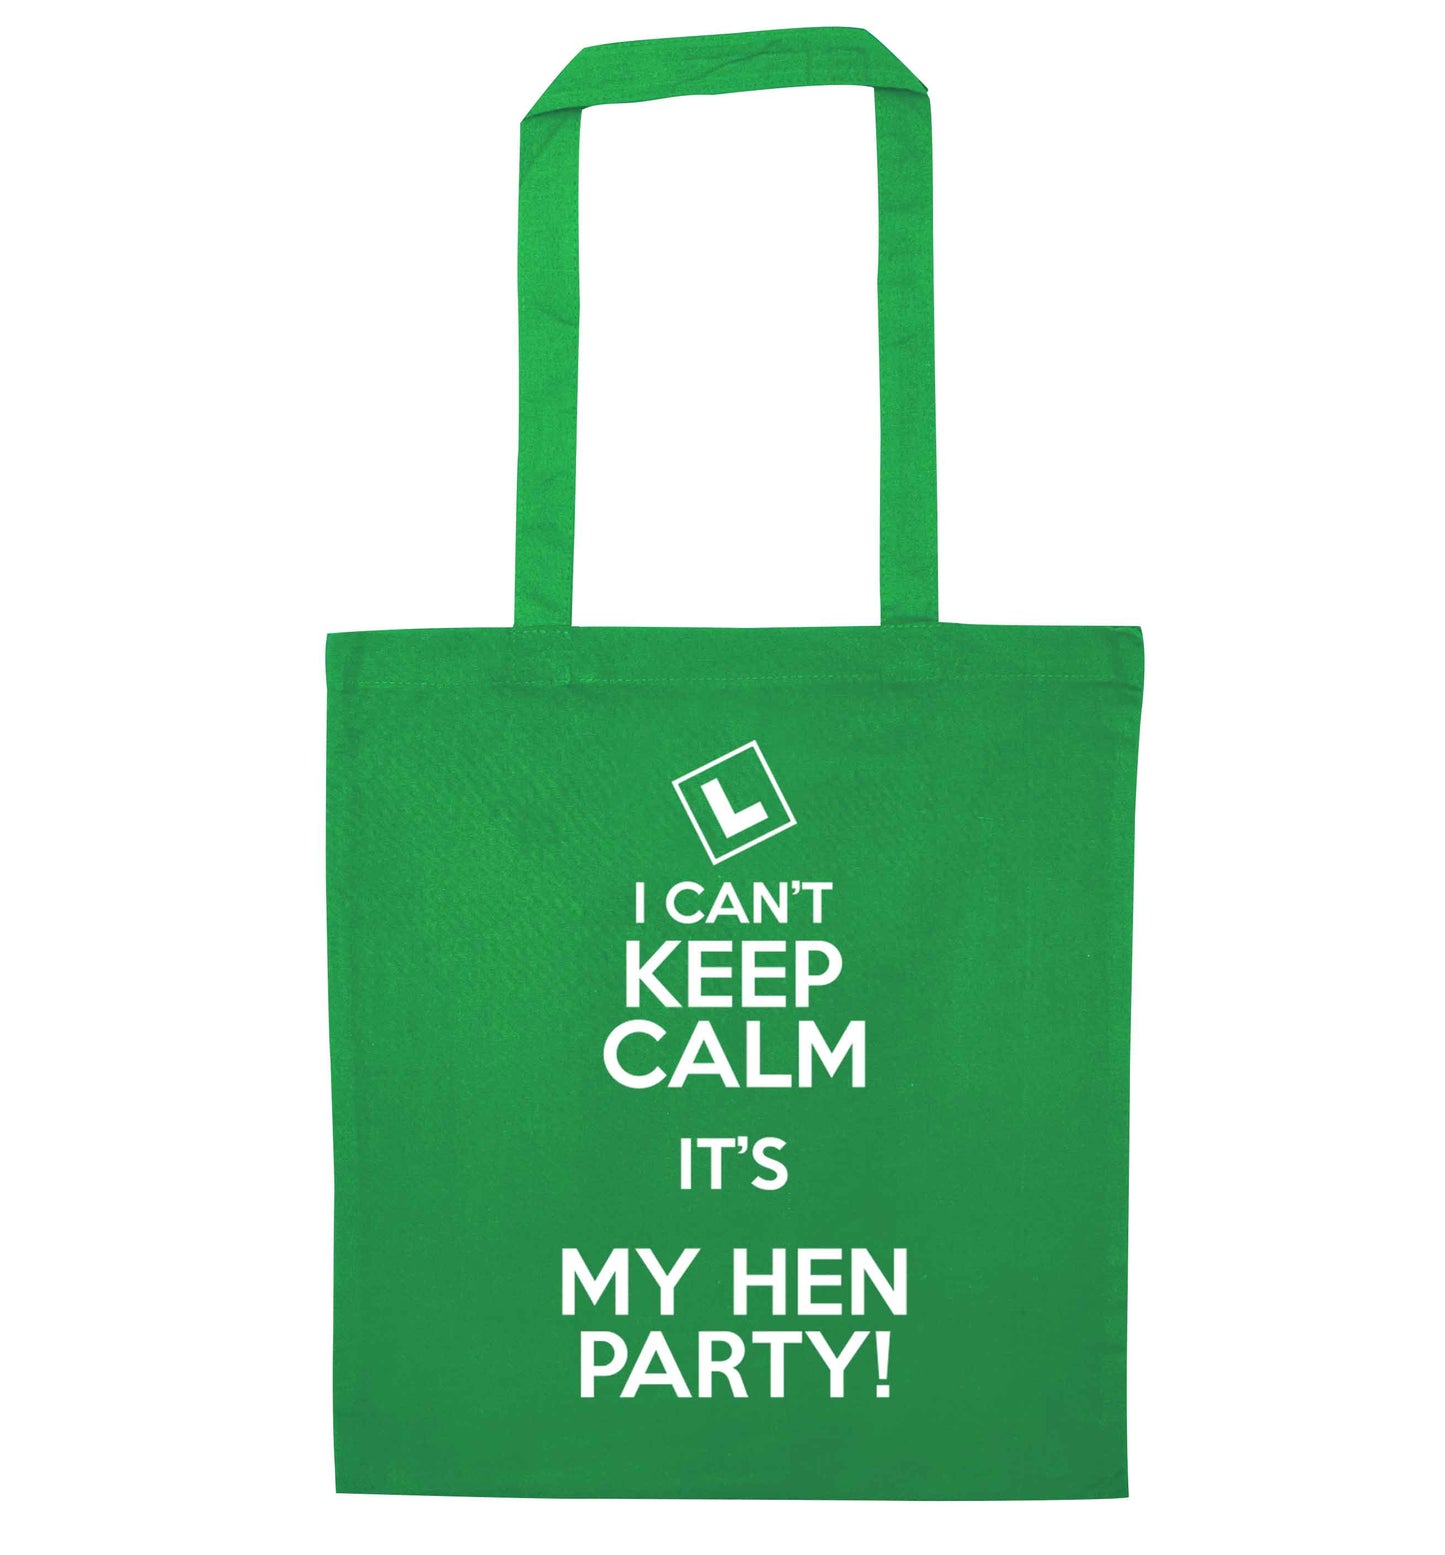 I can't keep calm it's my hen party green tote bag